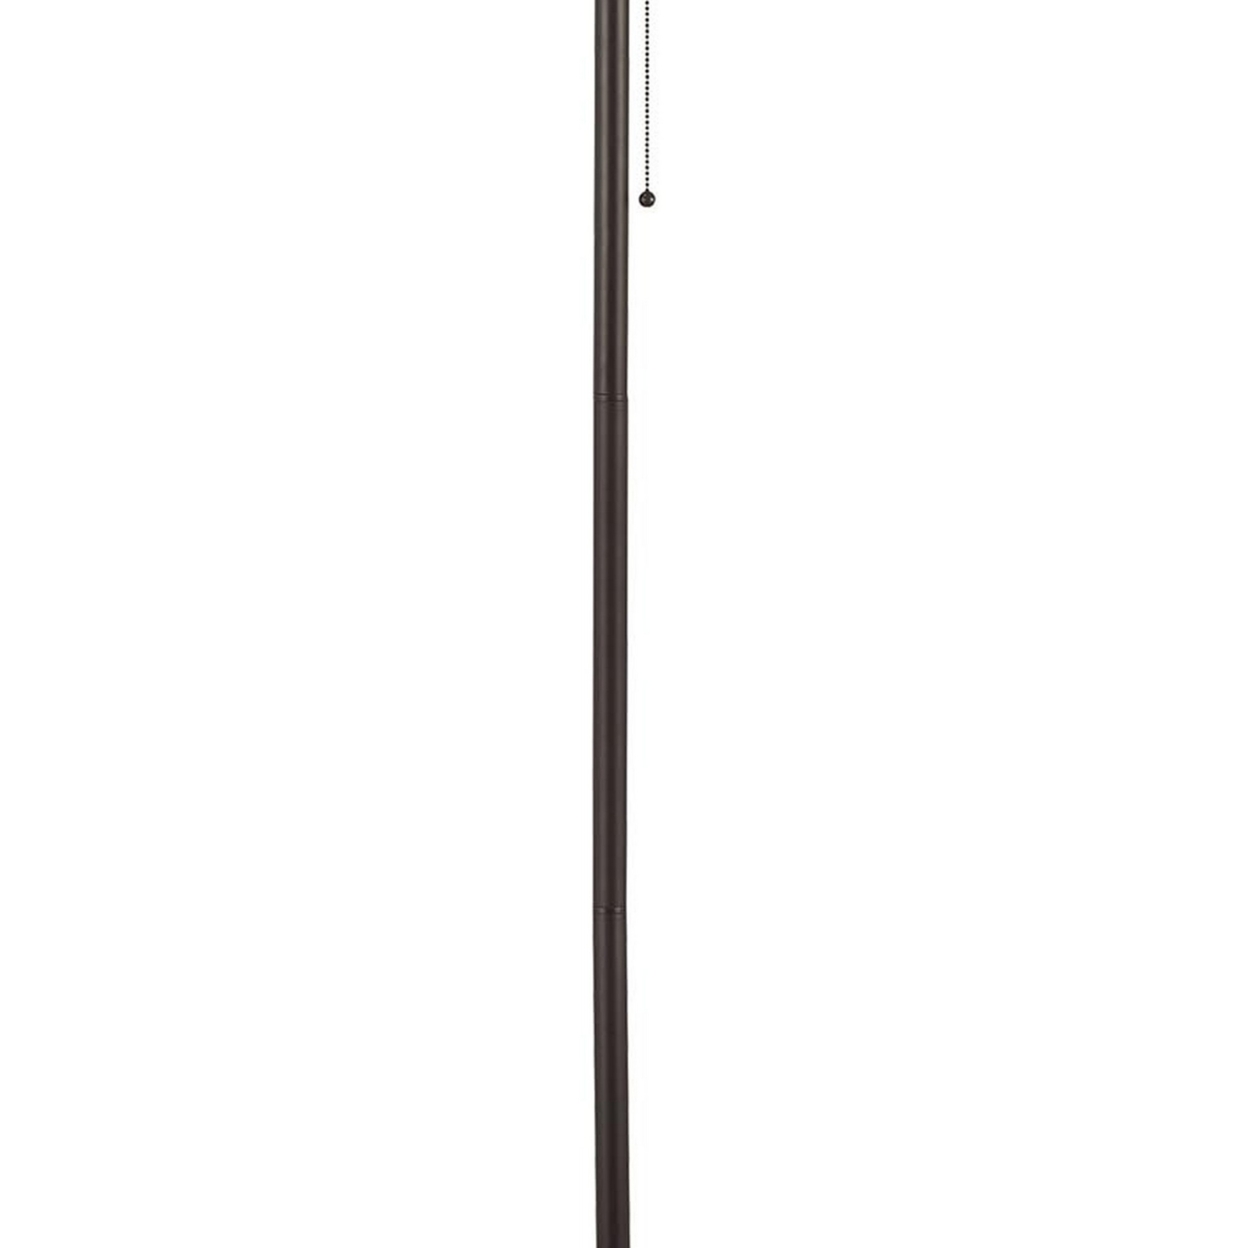 Metal Floor Lamp With Pull Chain Switch And Paper Shade, Off White And Black- Saltoro Sherpi